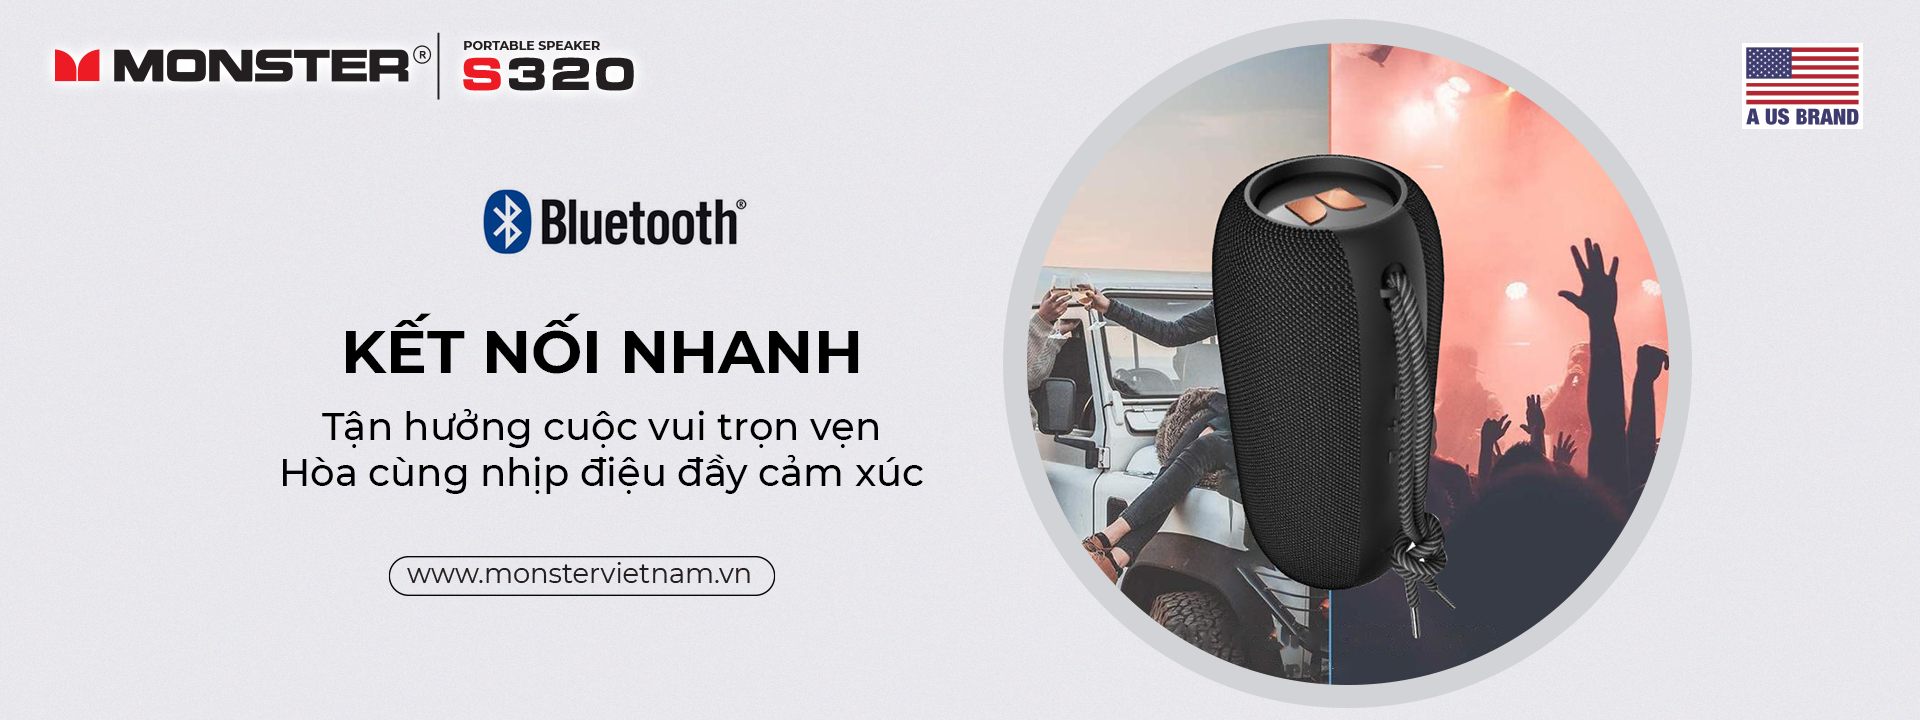 Loa Bluetooth Monster S320 Superstar | Anh Duy Audio